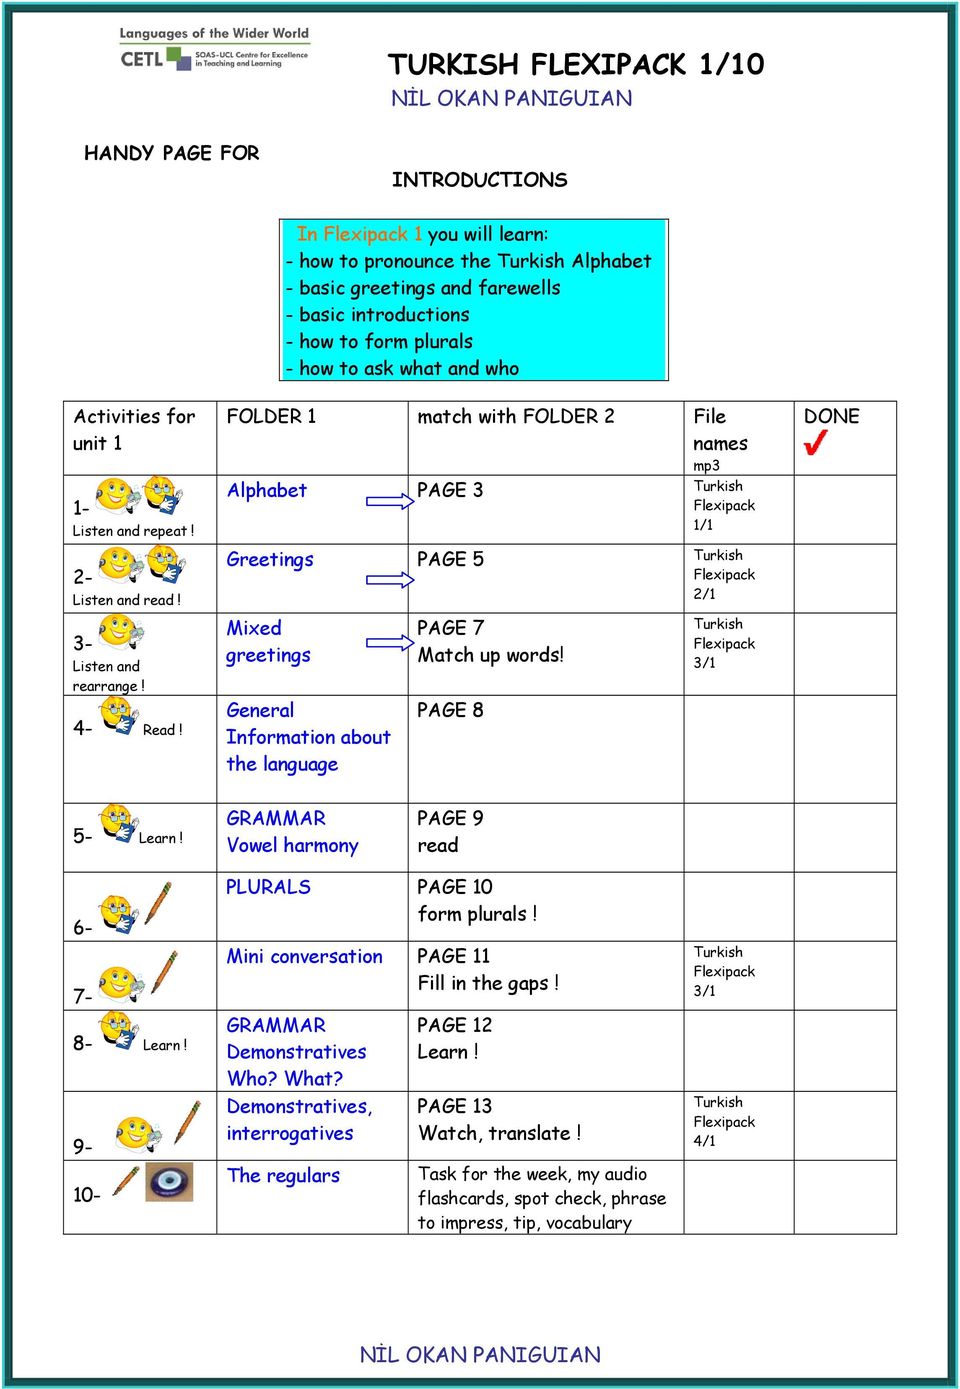 FOLDER 1 match with FOLDER 2 File names mp3 Alphabet PAGE 3 Turkish Flexipack 1/1 Greetings PAGE 5 Turkish Flexipack 2/1 DONE 3- Listen and rearrange! Mixed greetings PAGE 7 Match up words!